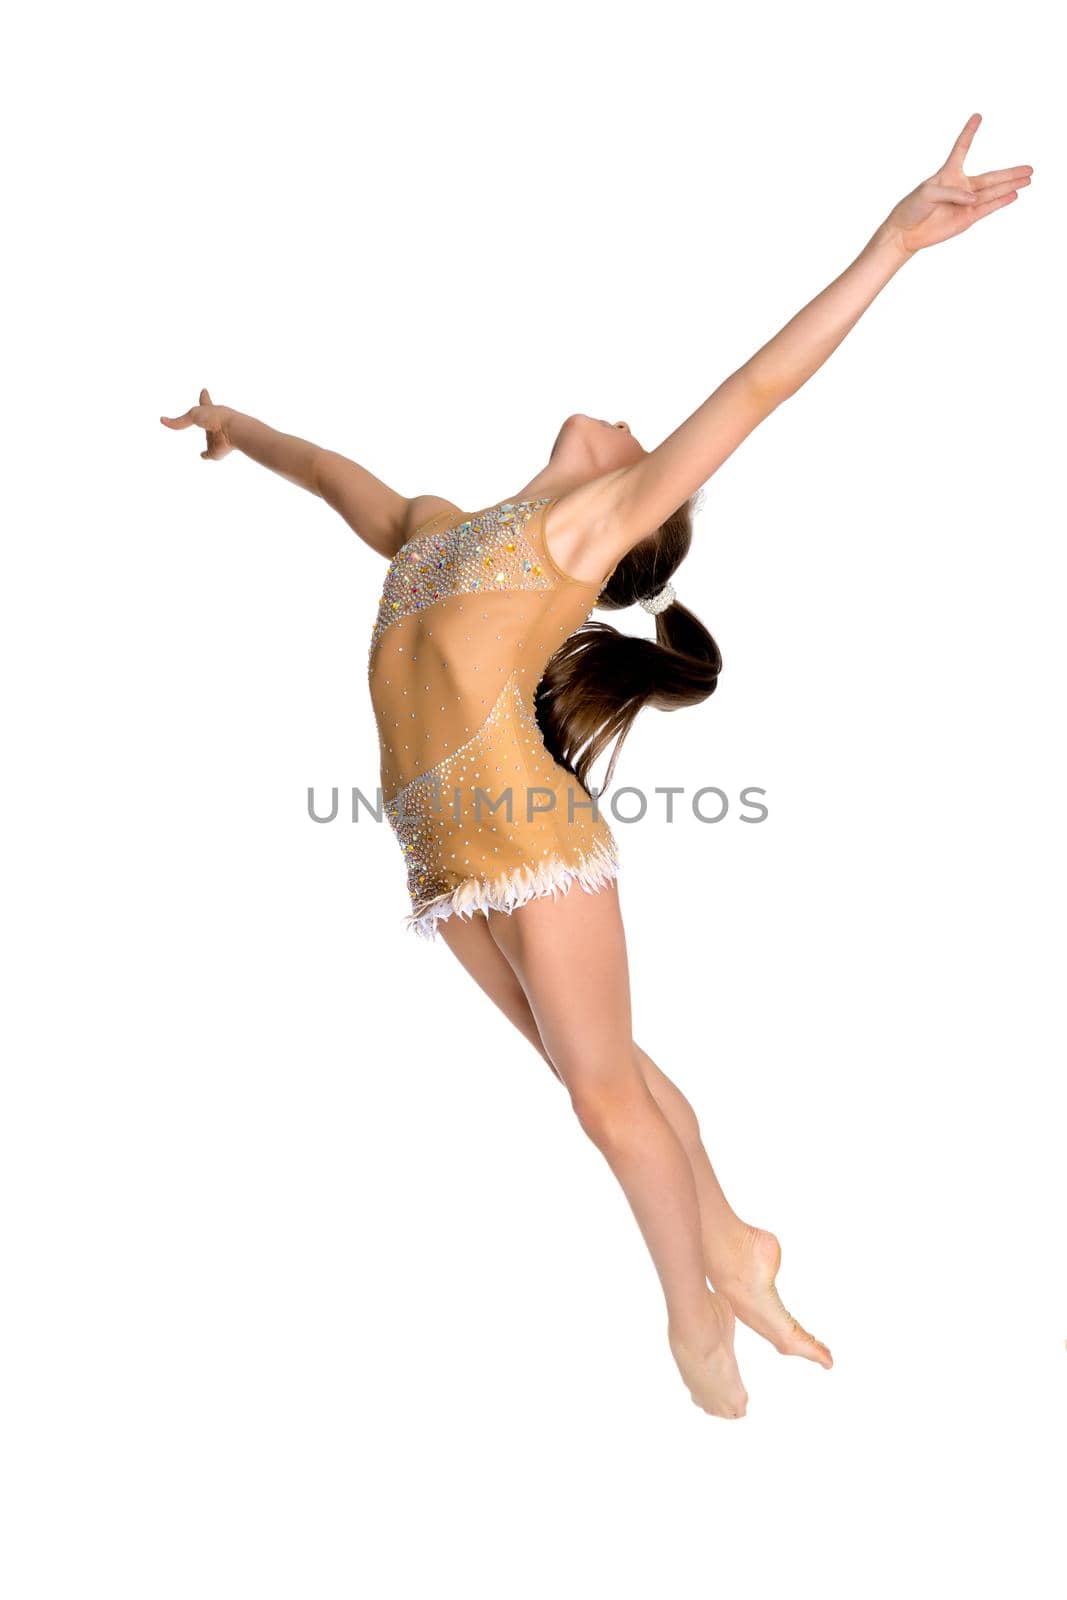 Girl gymnast performs a jump. The concept of fitness, gymnastics, sports. Isolated on white background.